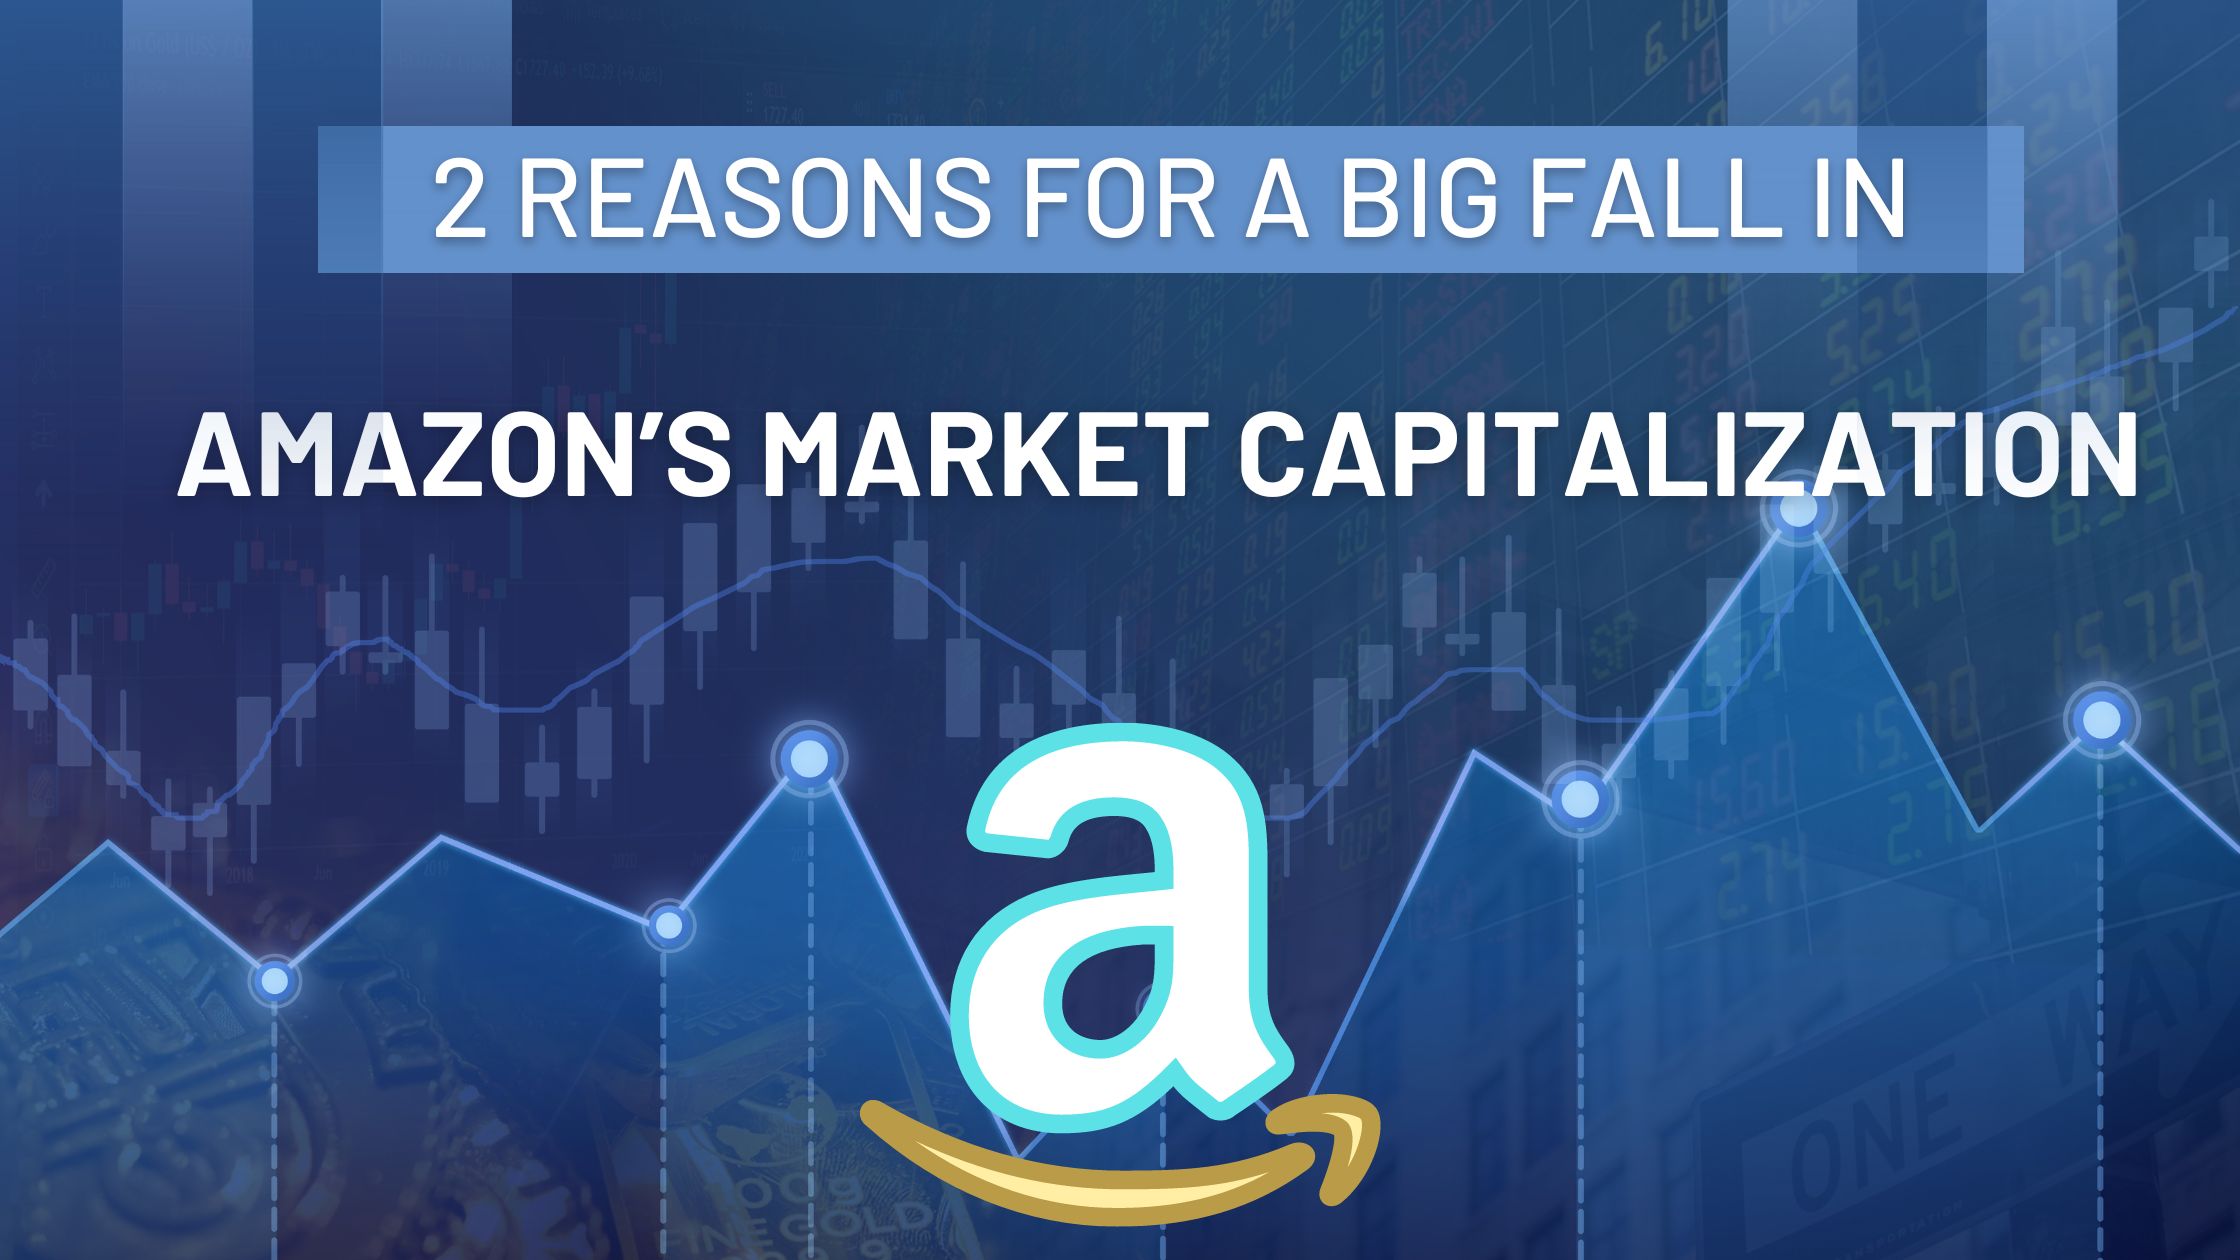 2 reasons for a big fall in Amazon’s market capitalization